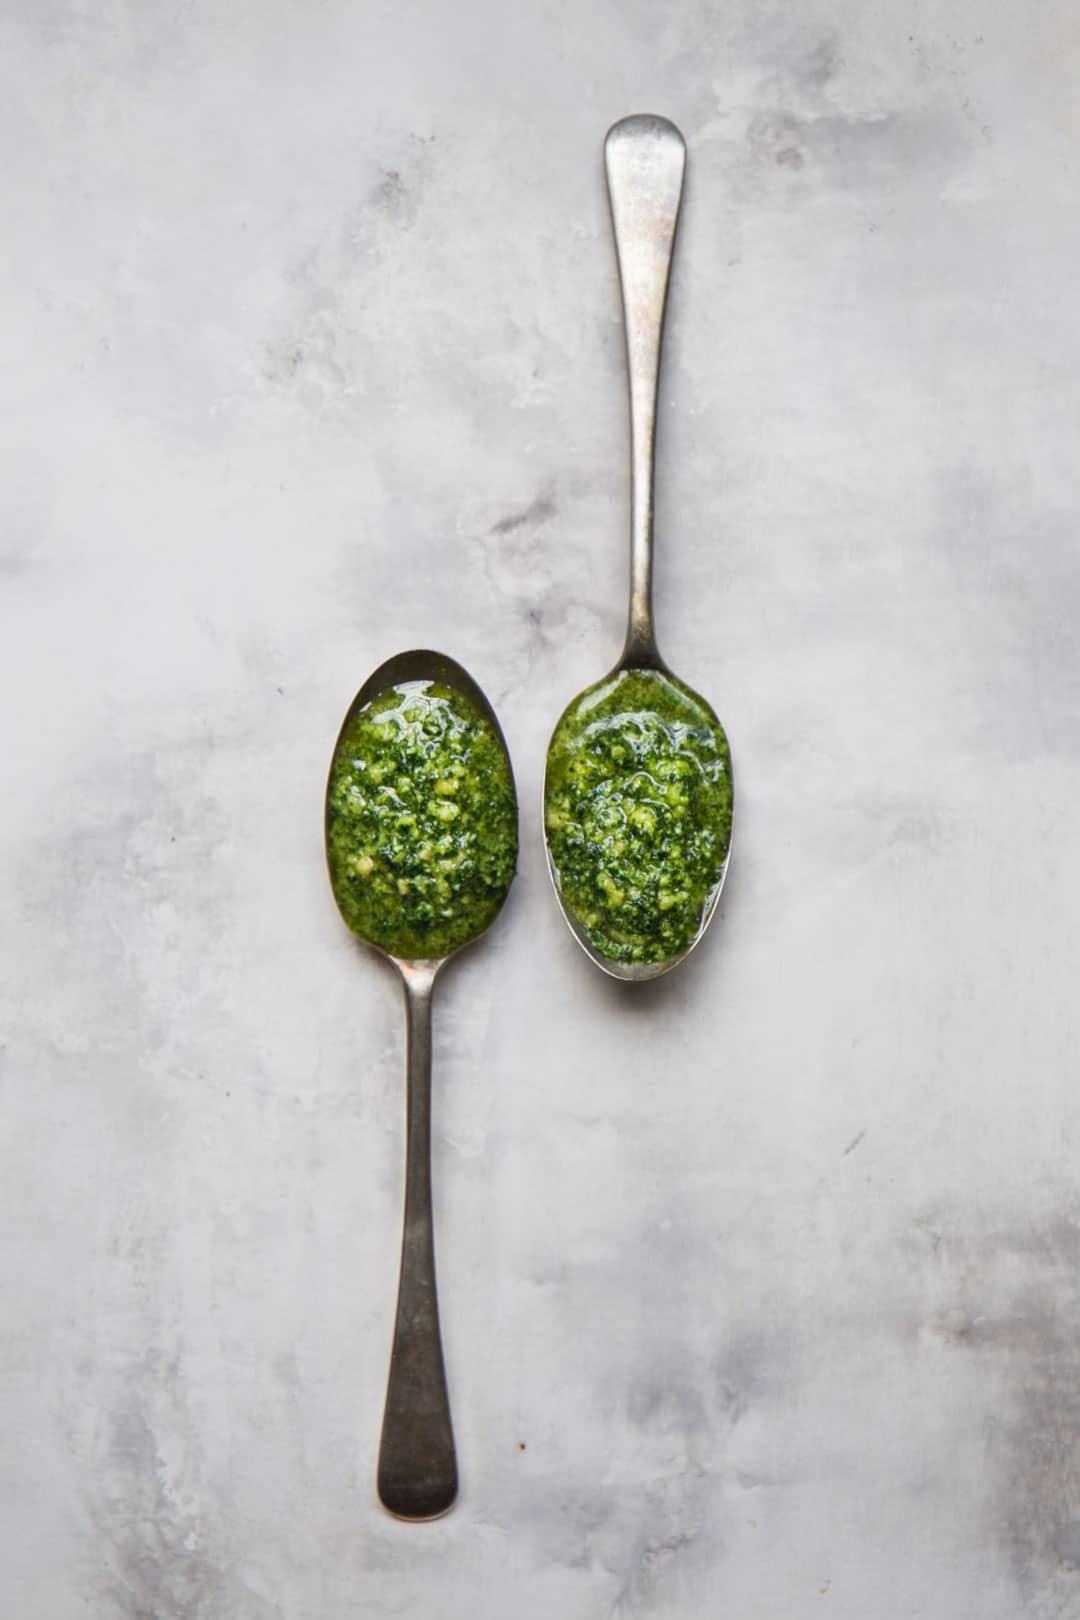 flat lay image of two rustic spoons filled with vegan kale pesto on a marbled tabletop